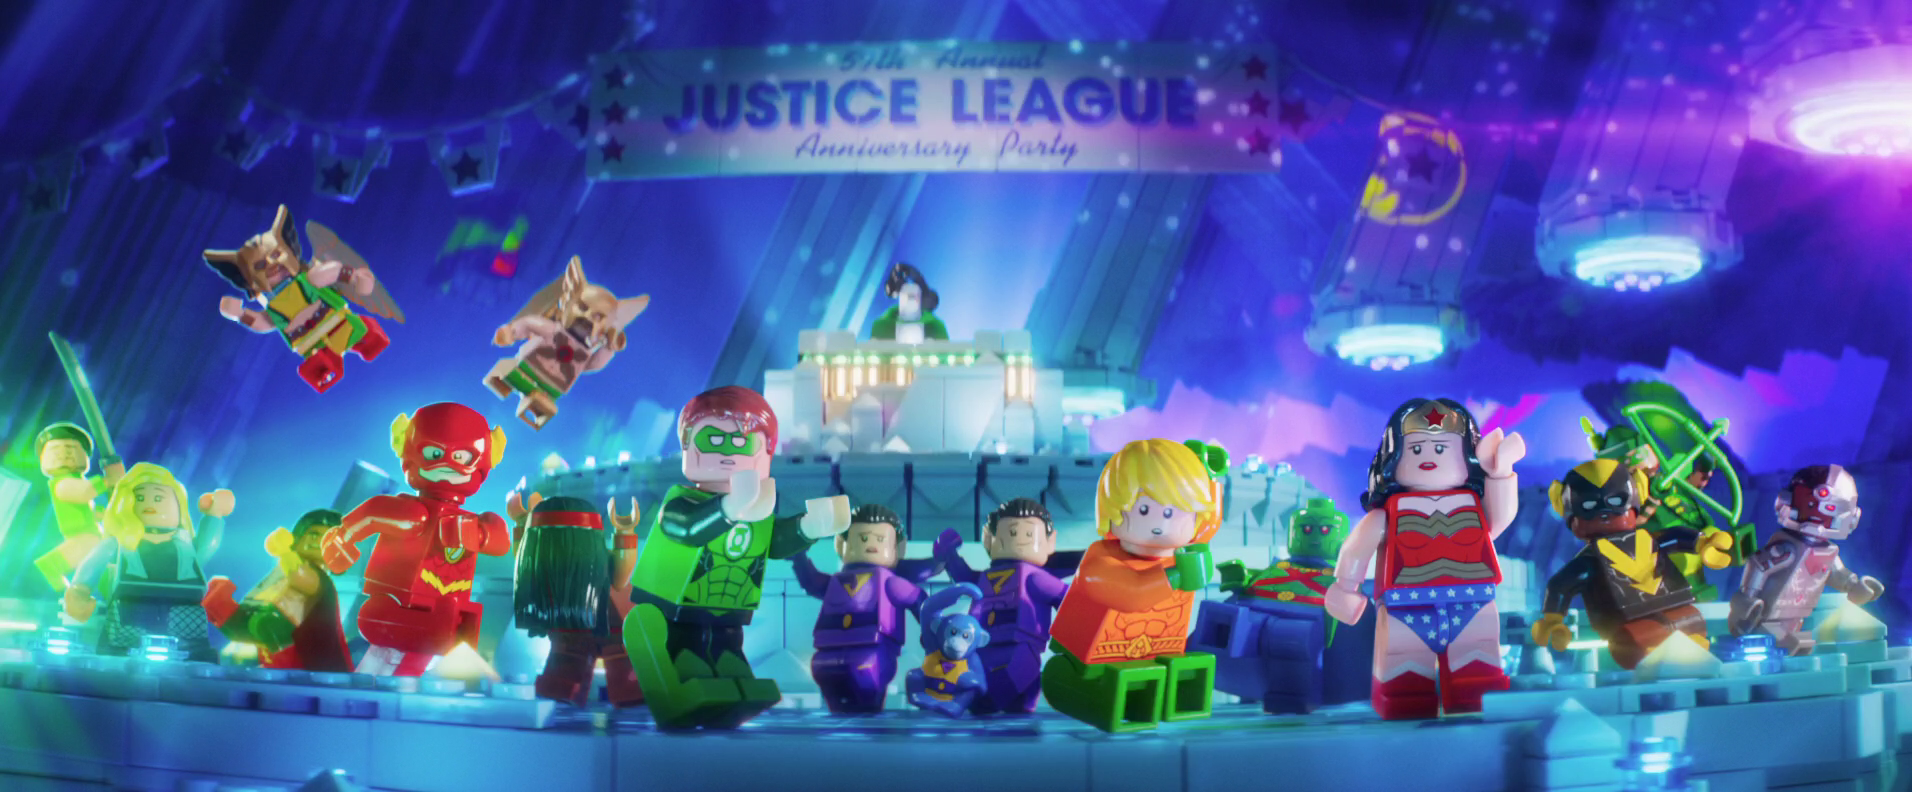 lego justice league anniversary party instructions